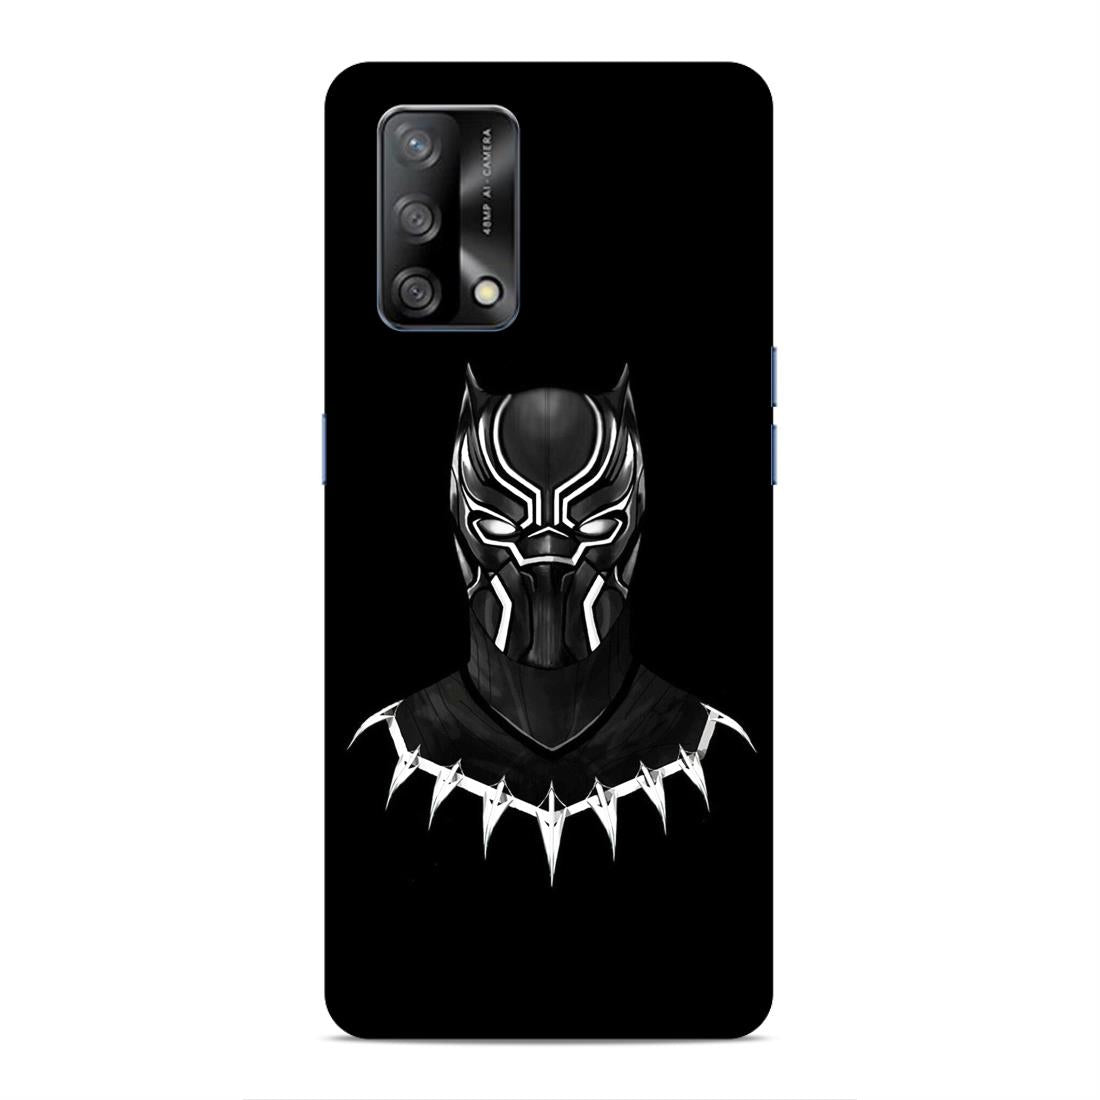 Black Panther Hard Back Case For Oppo F19 / F19s